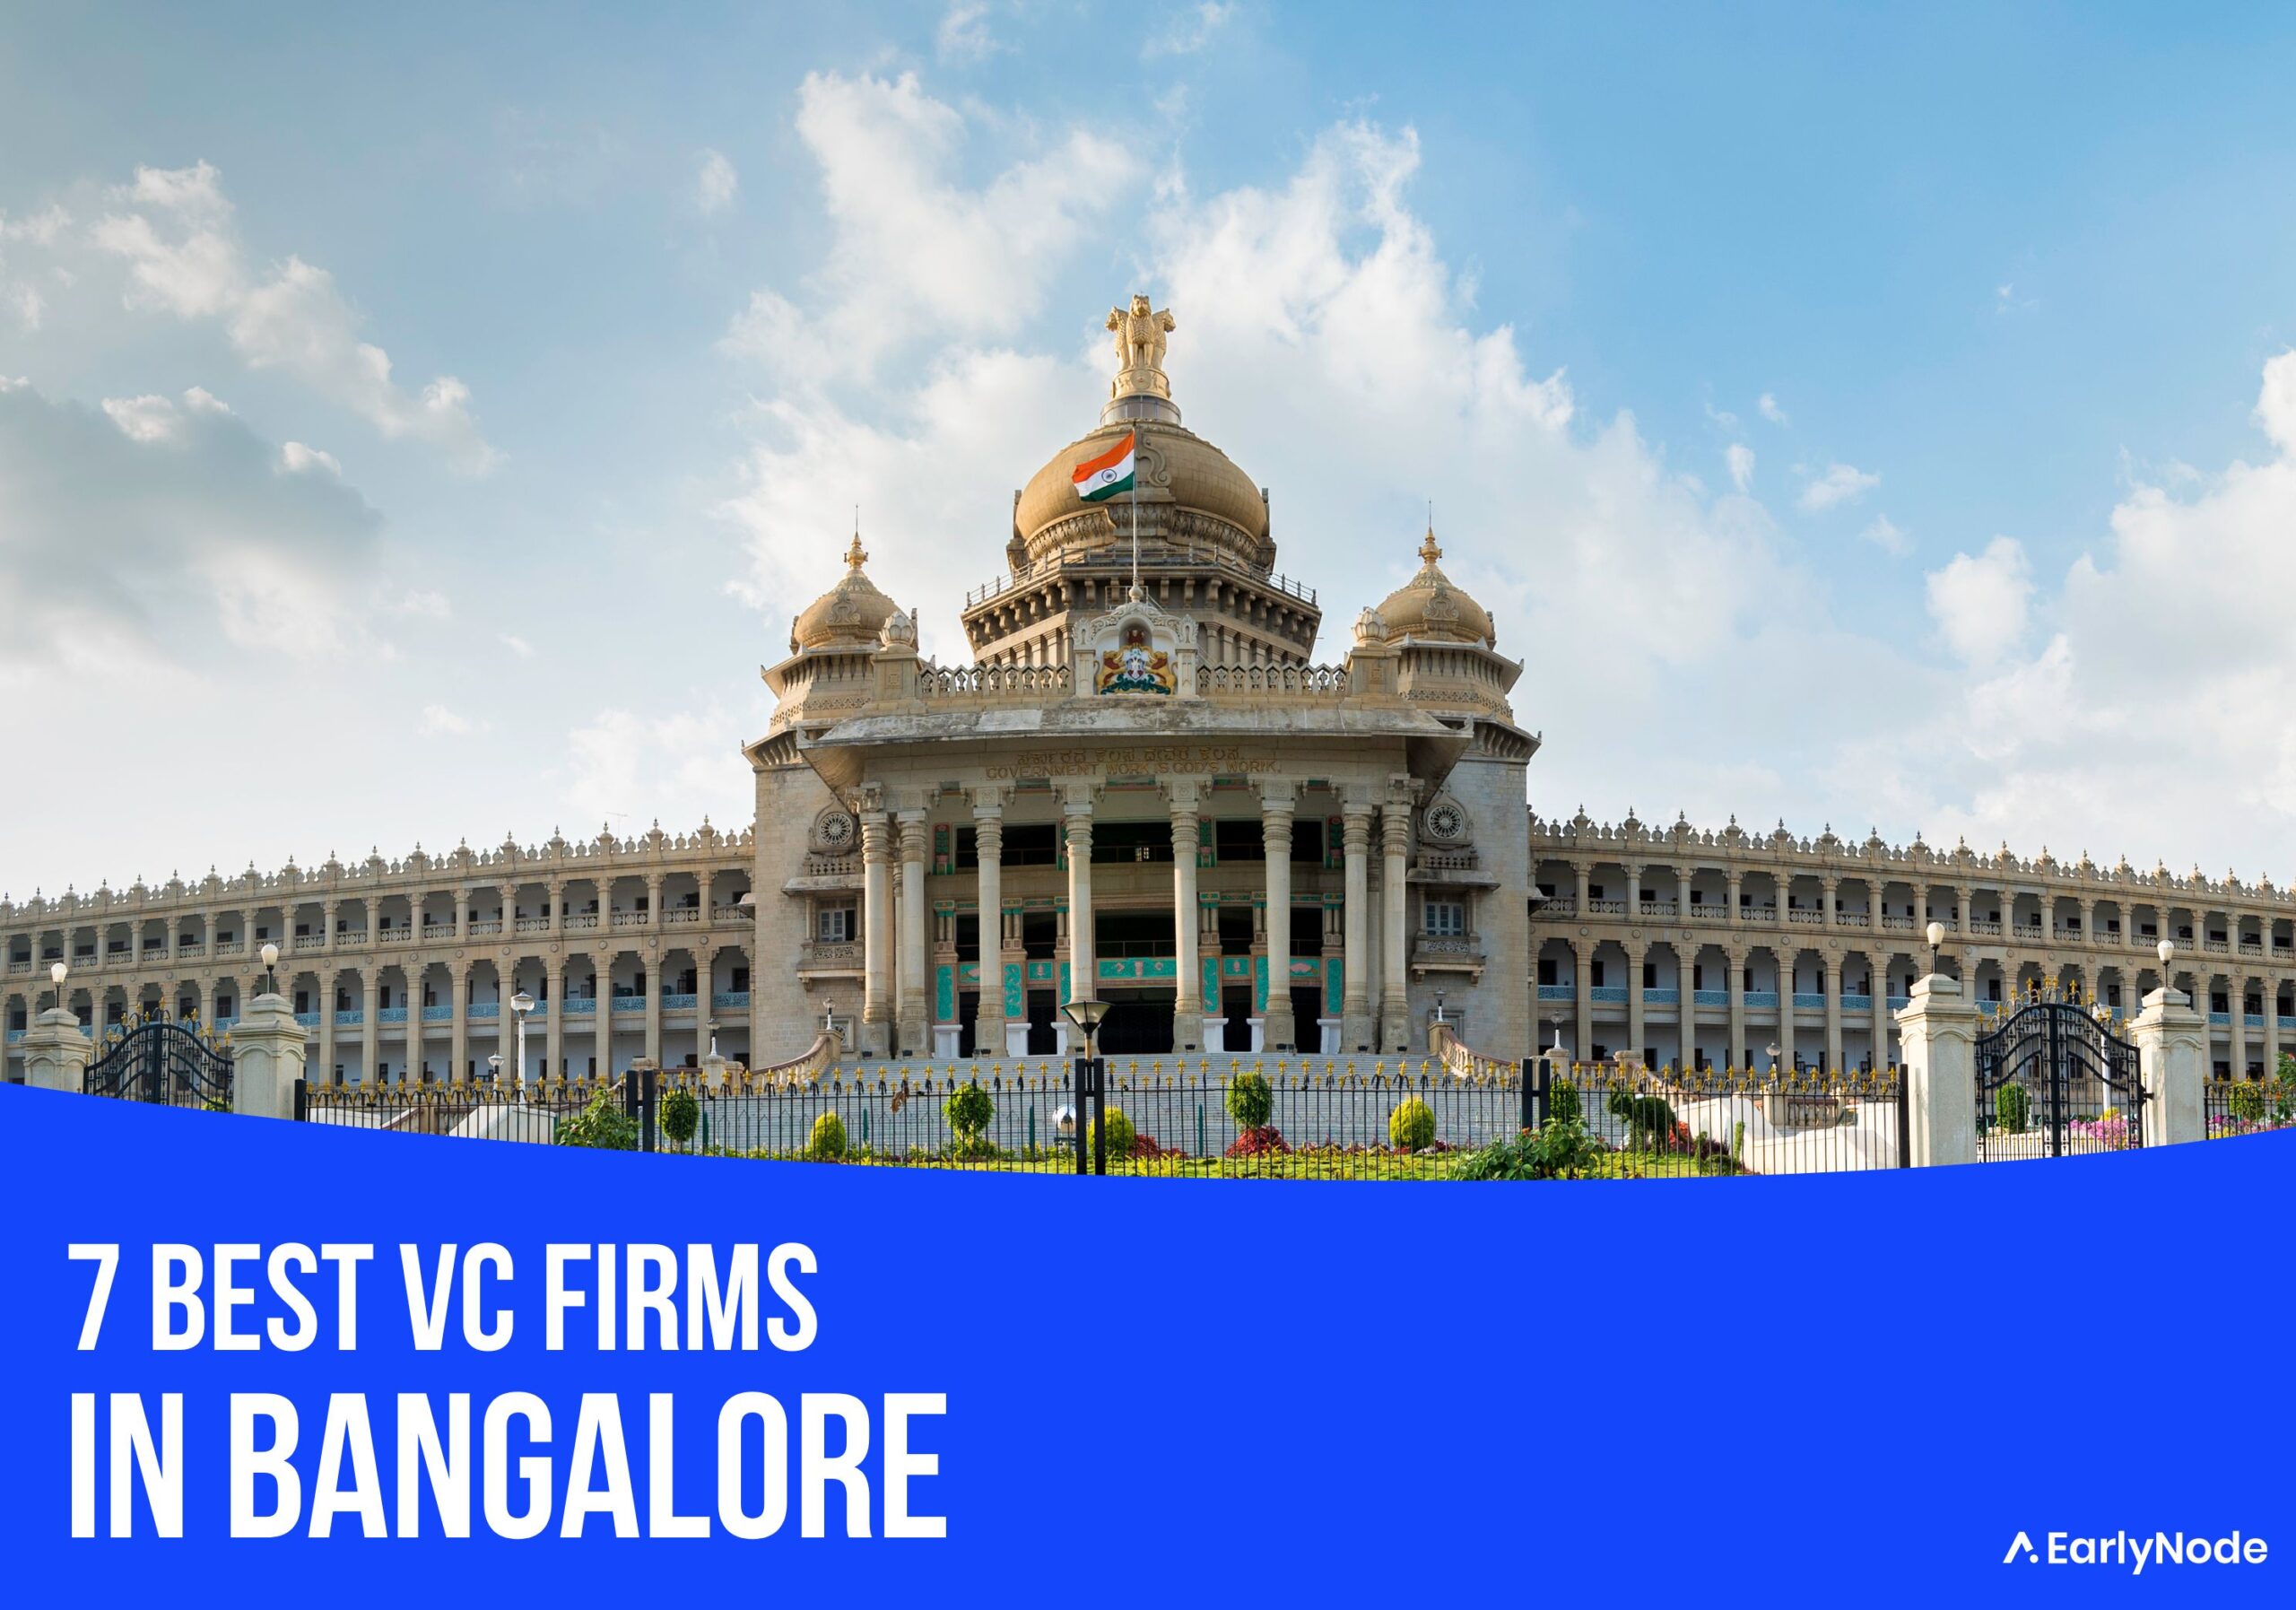 7 Best VC Firms in Bangalore